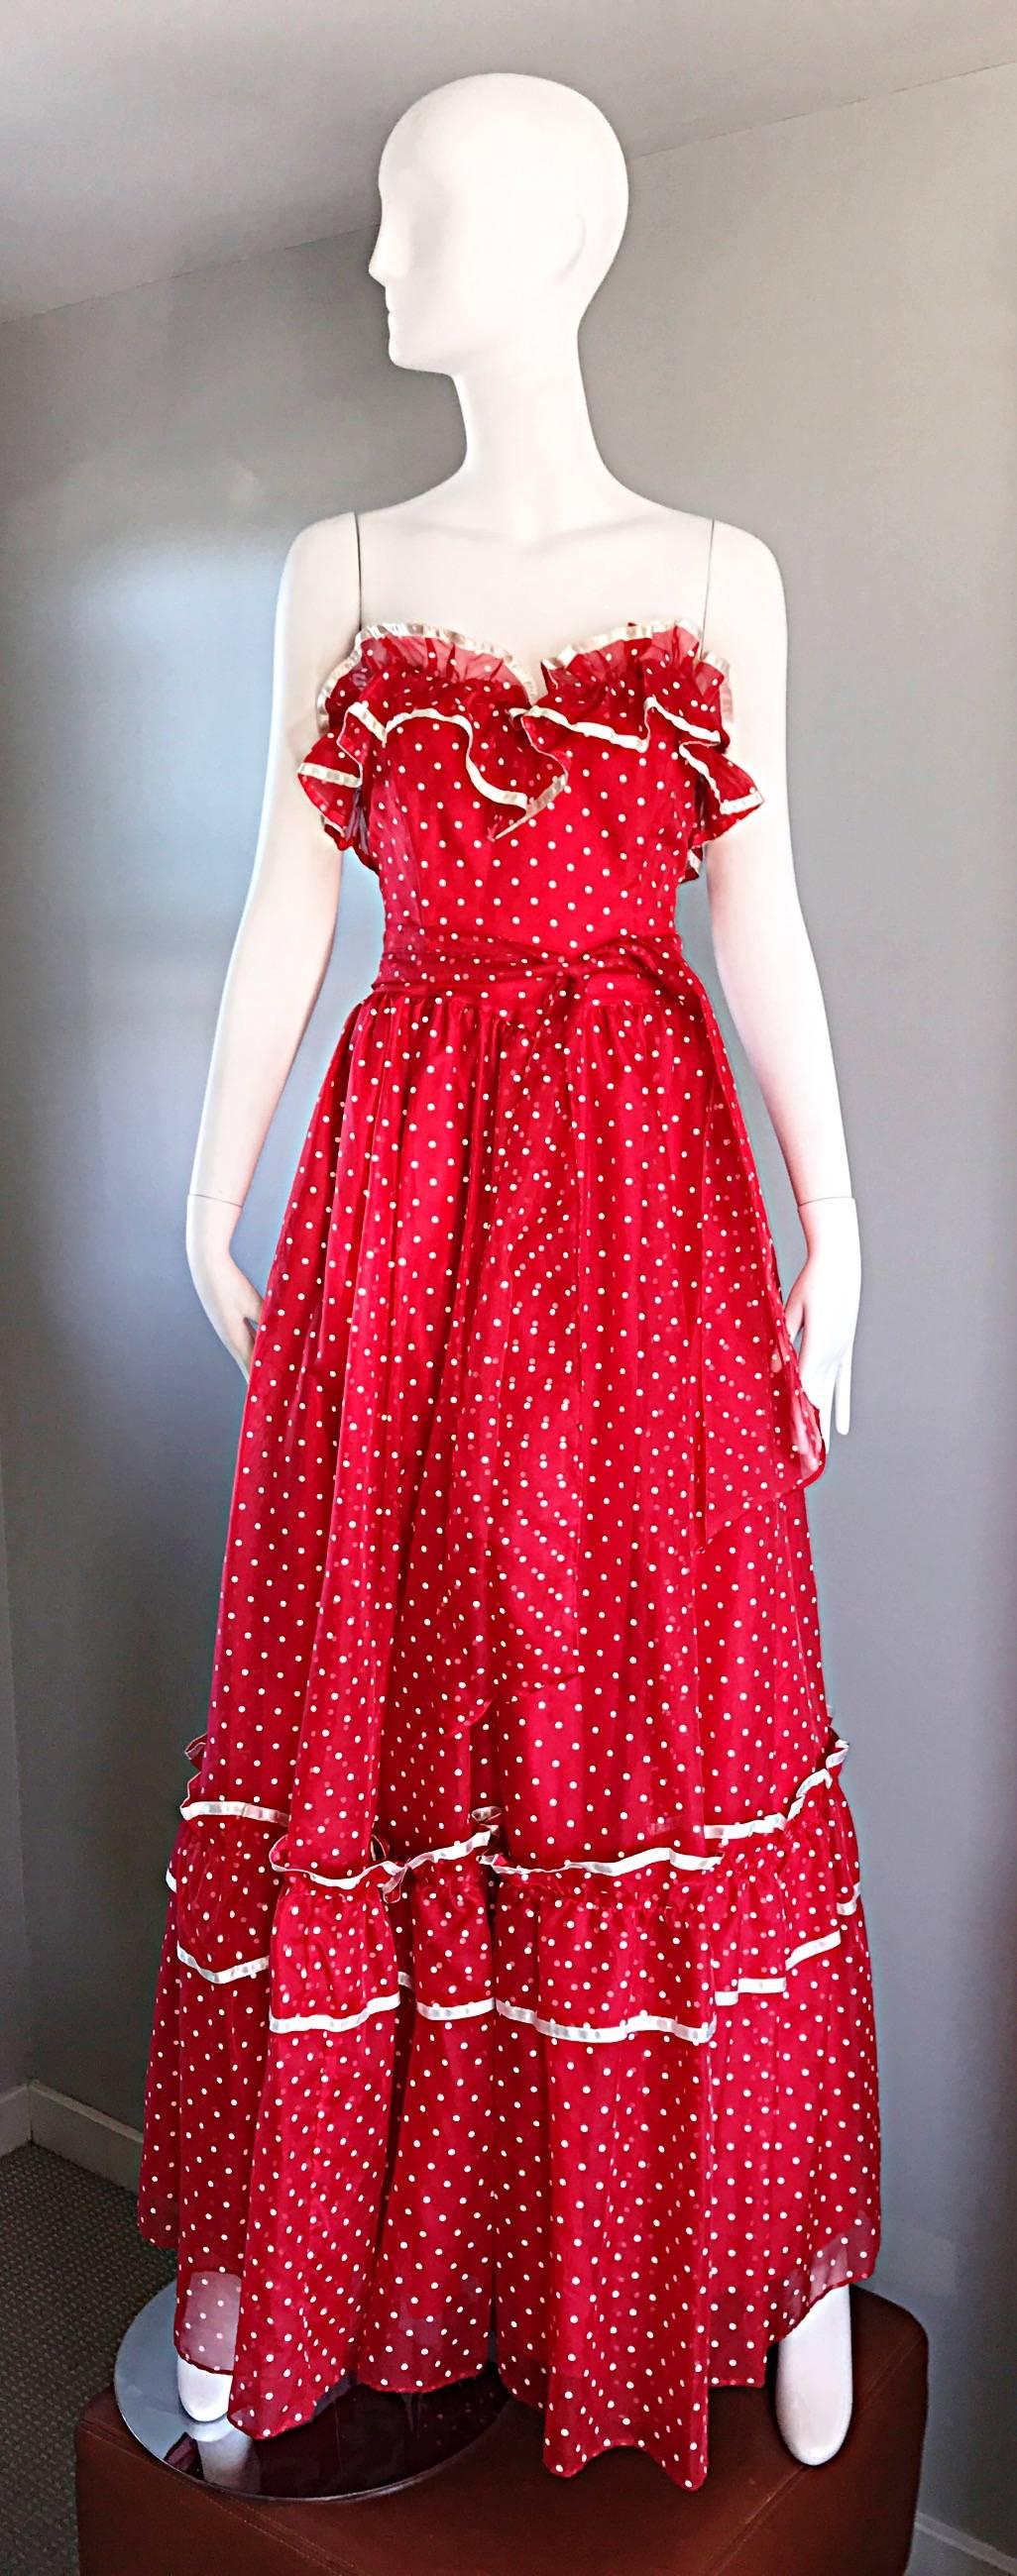 Insanely chic vintage 1970s red and white hand painted polka dot maxi dress! Features an allover print of mini white polka dots. Ruffles above bust, and at mid hem. Attached sash belt can be tied in the front or back. Hidden zipper up the back. Can